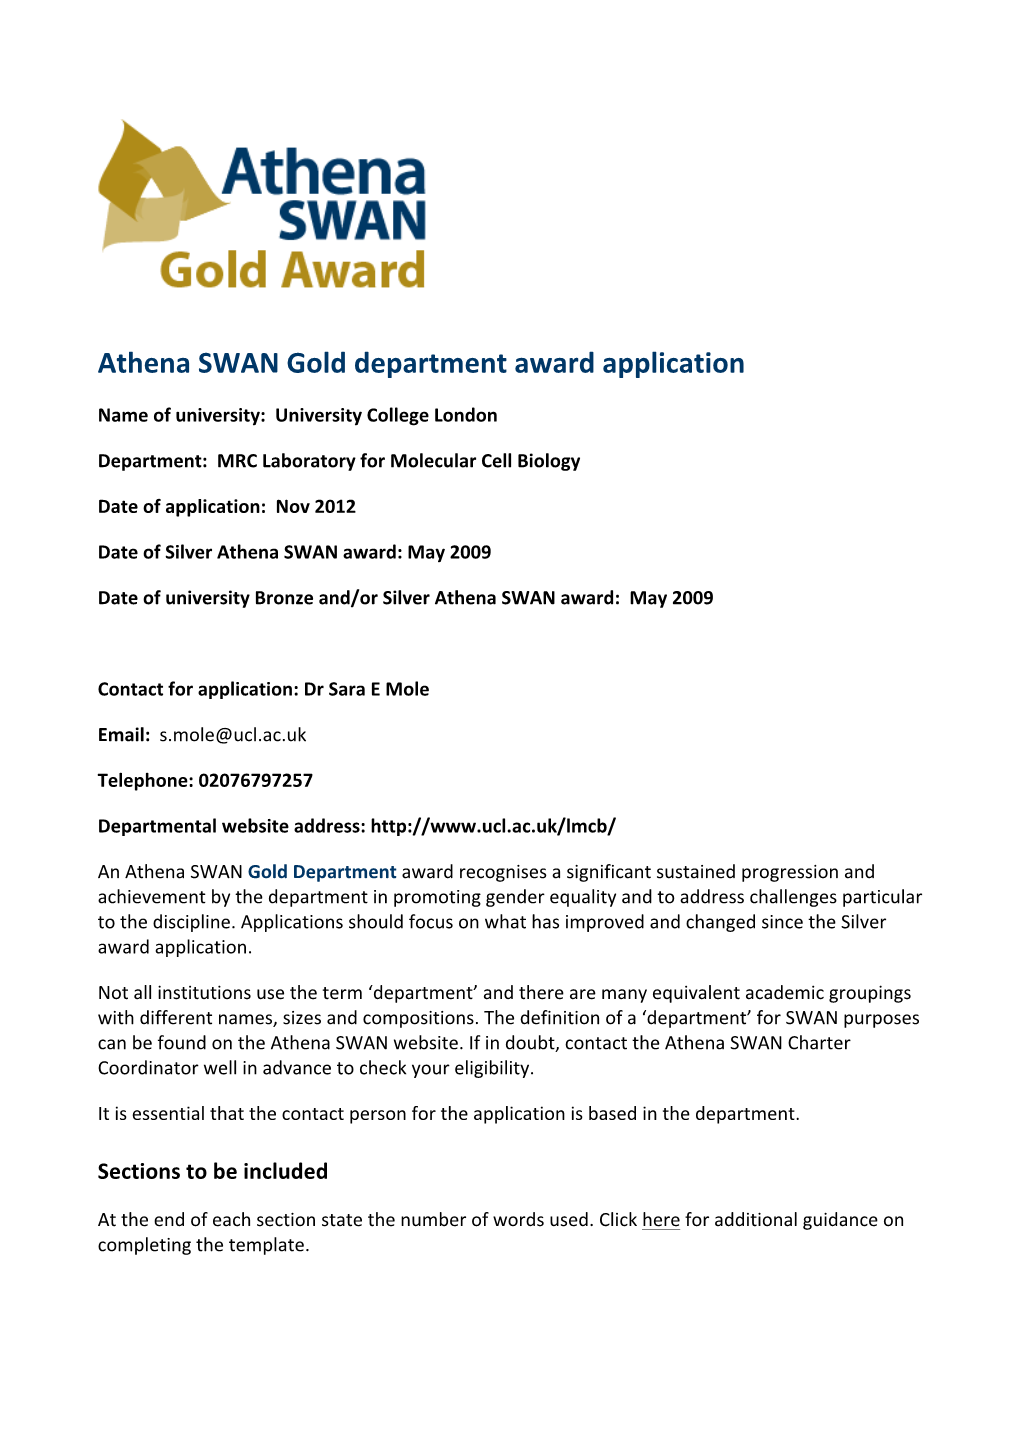 UCL LMCB Athena-SWAN Application Gold For